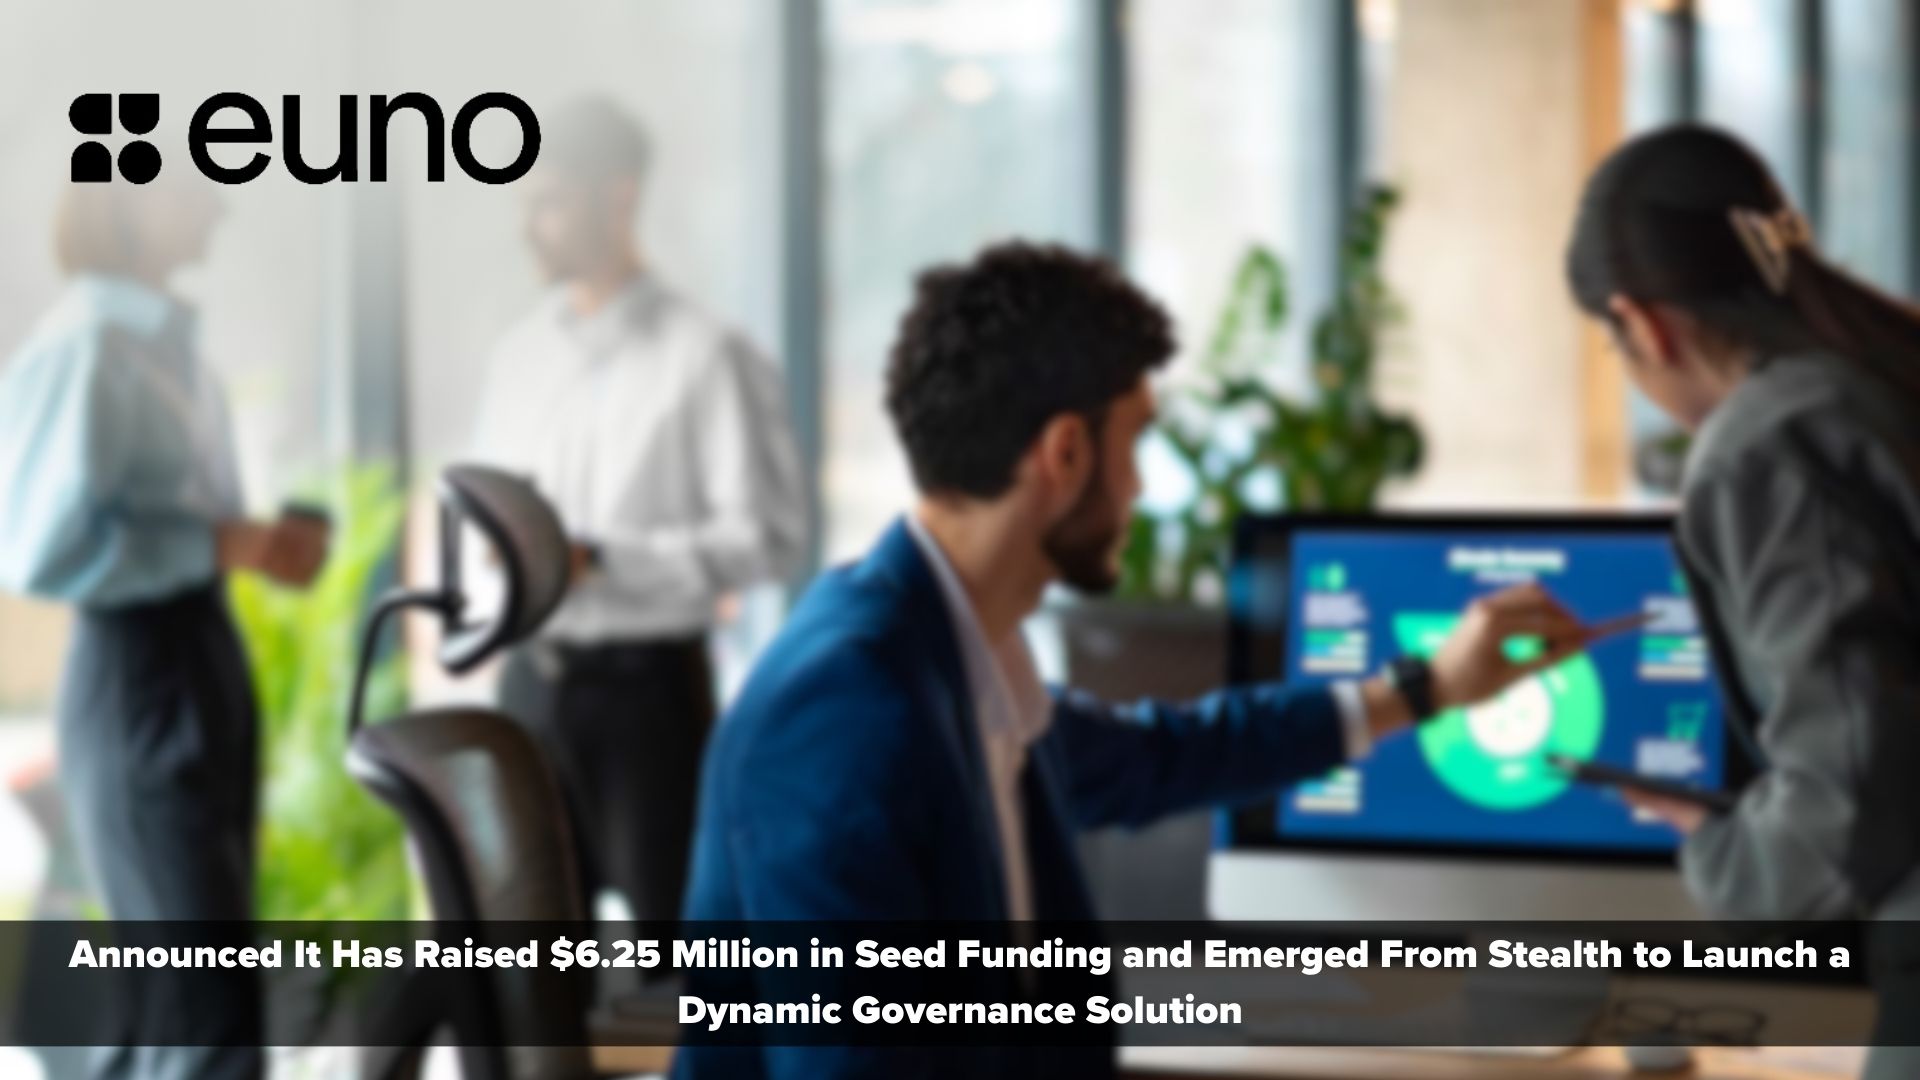 Euno Emerges from Stealth with Frictionless Data Model Governance Platform, Secures $6.25M in Seed Funding